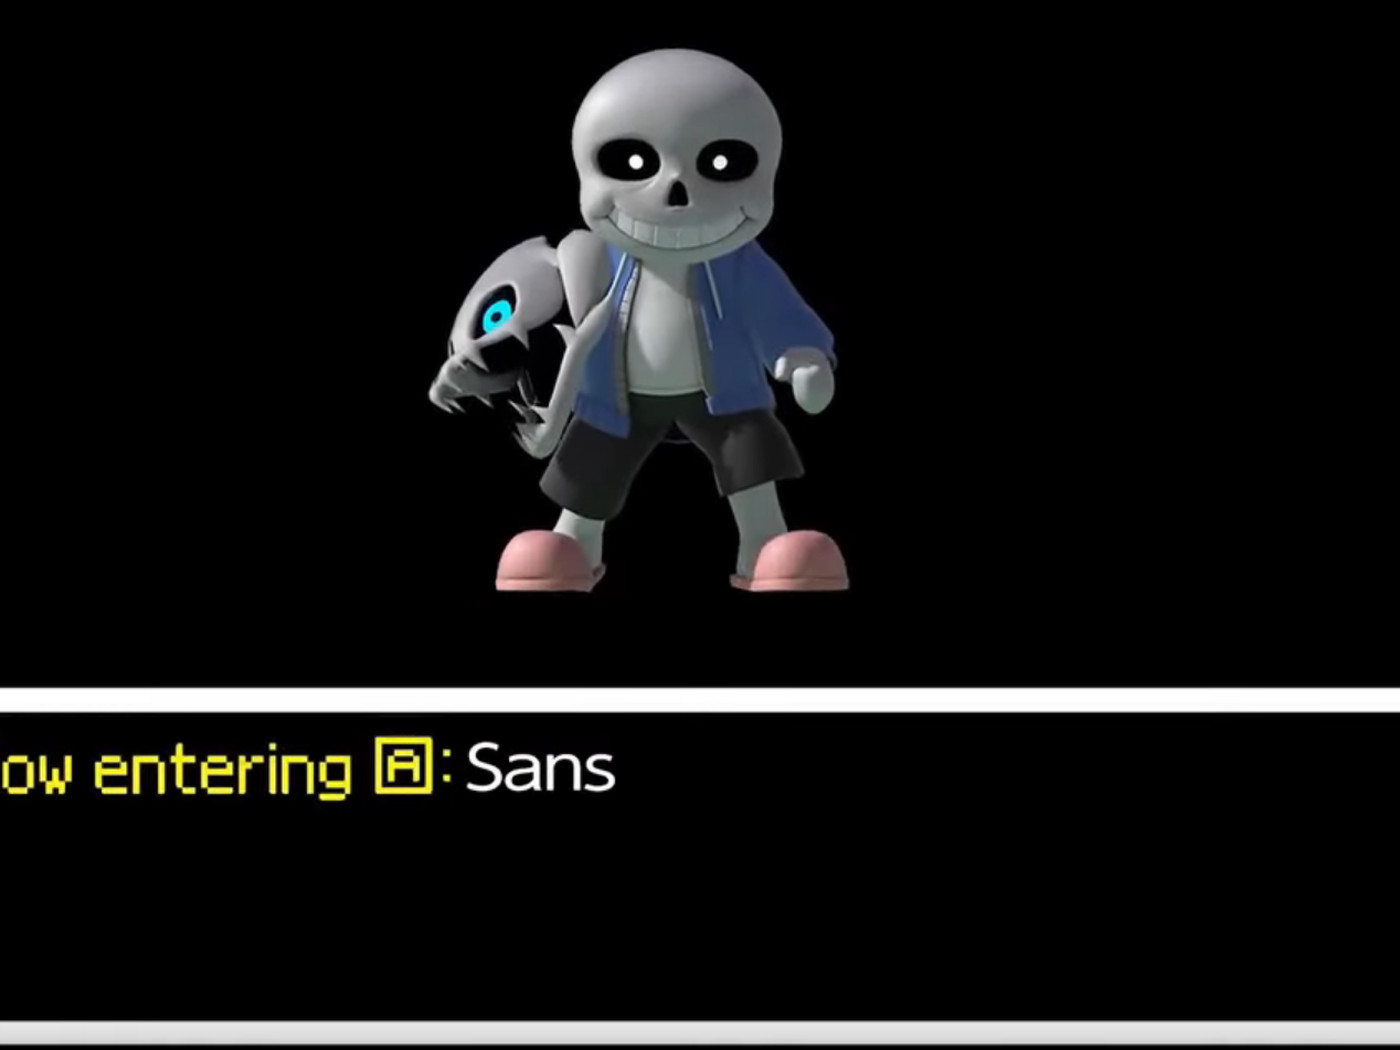 Sans From Undertale Joins Smash Bros Ultimate As A Mii Fighter